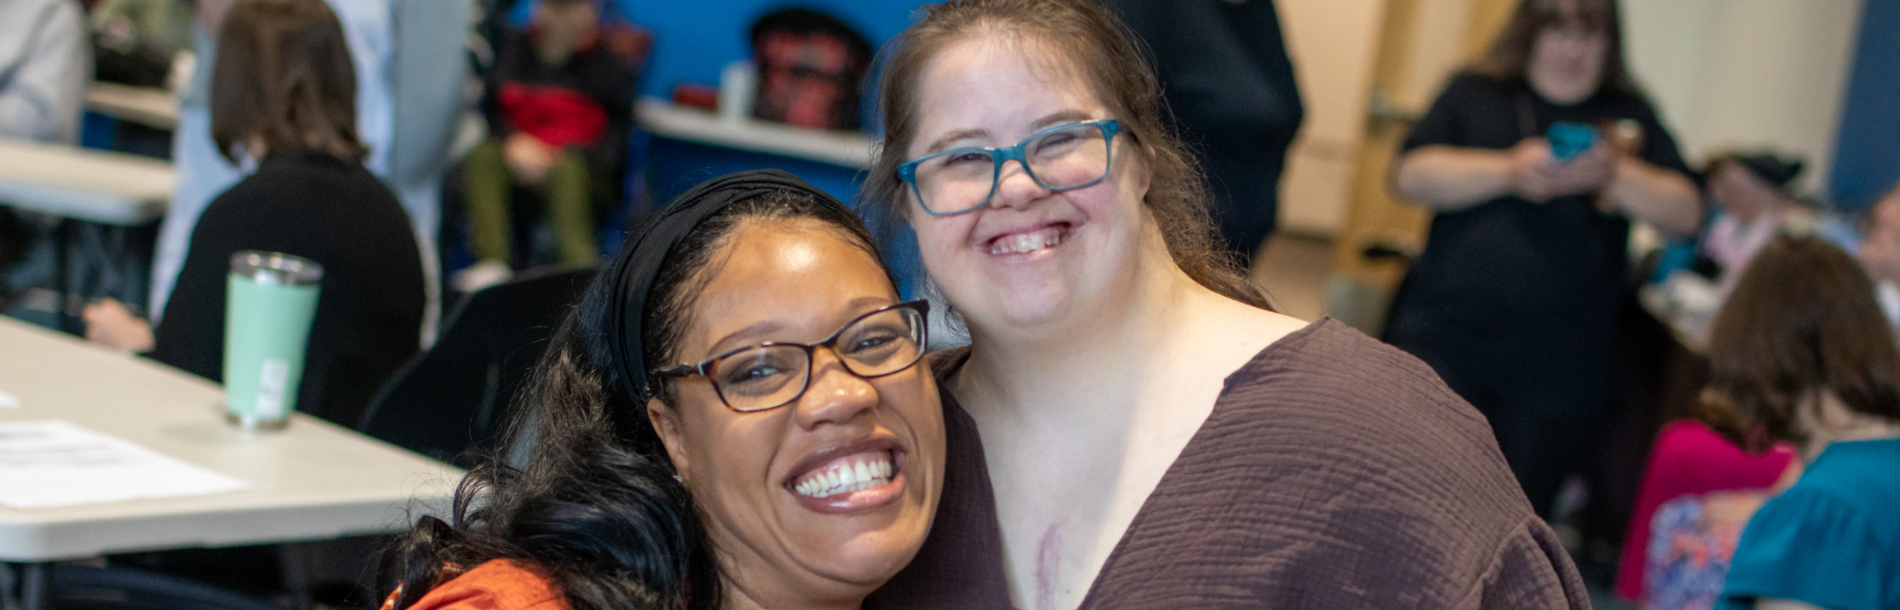 Two women hugging and smiling.